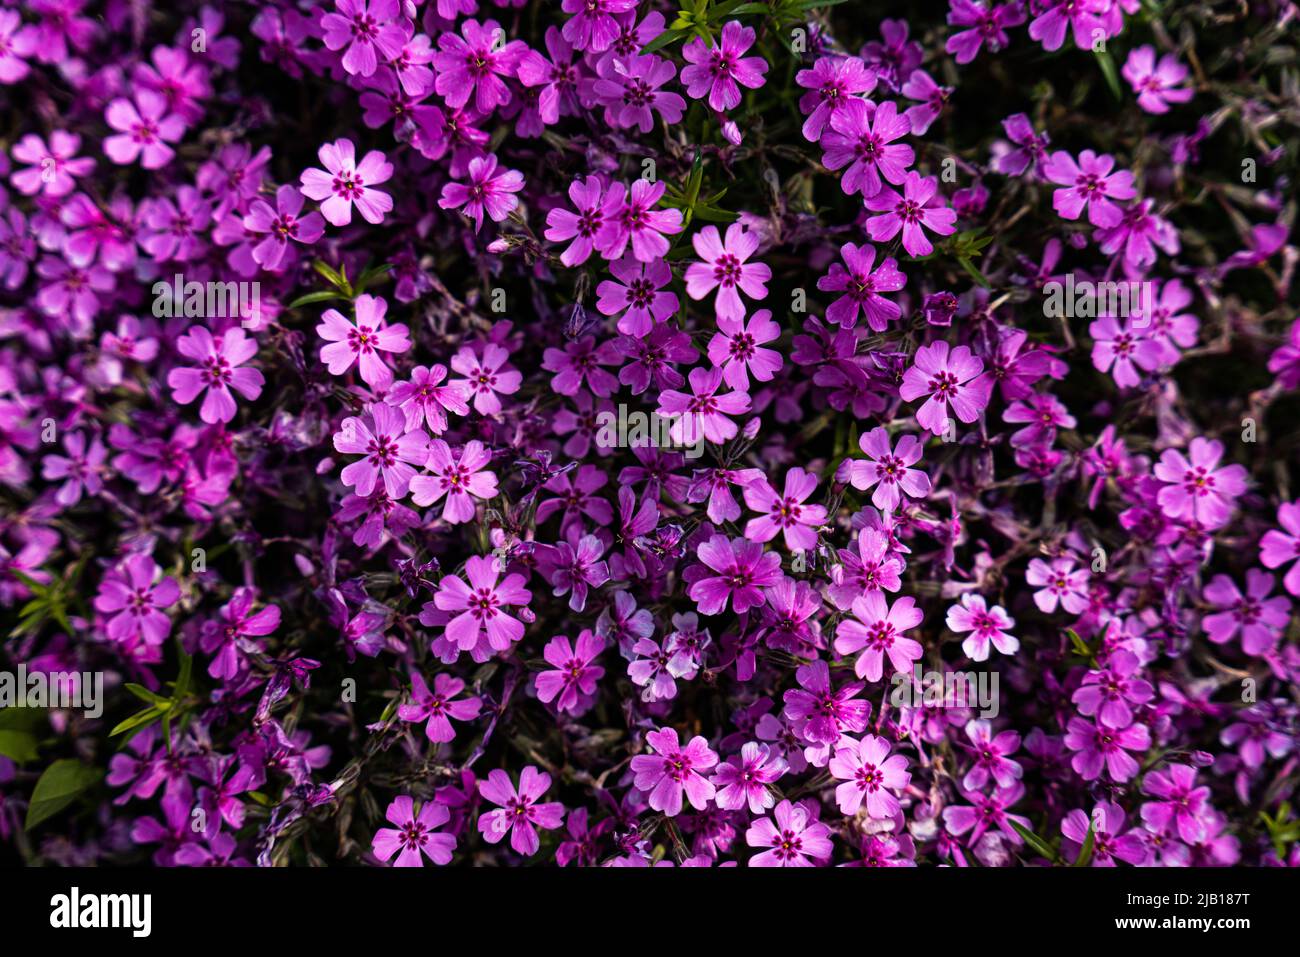 Tufted phlox (Phlox douglasii) 'Crackerjack' blooms in the plant nursery in early June. High quality photo Stock Photo